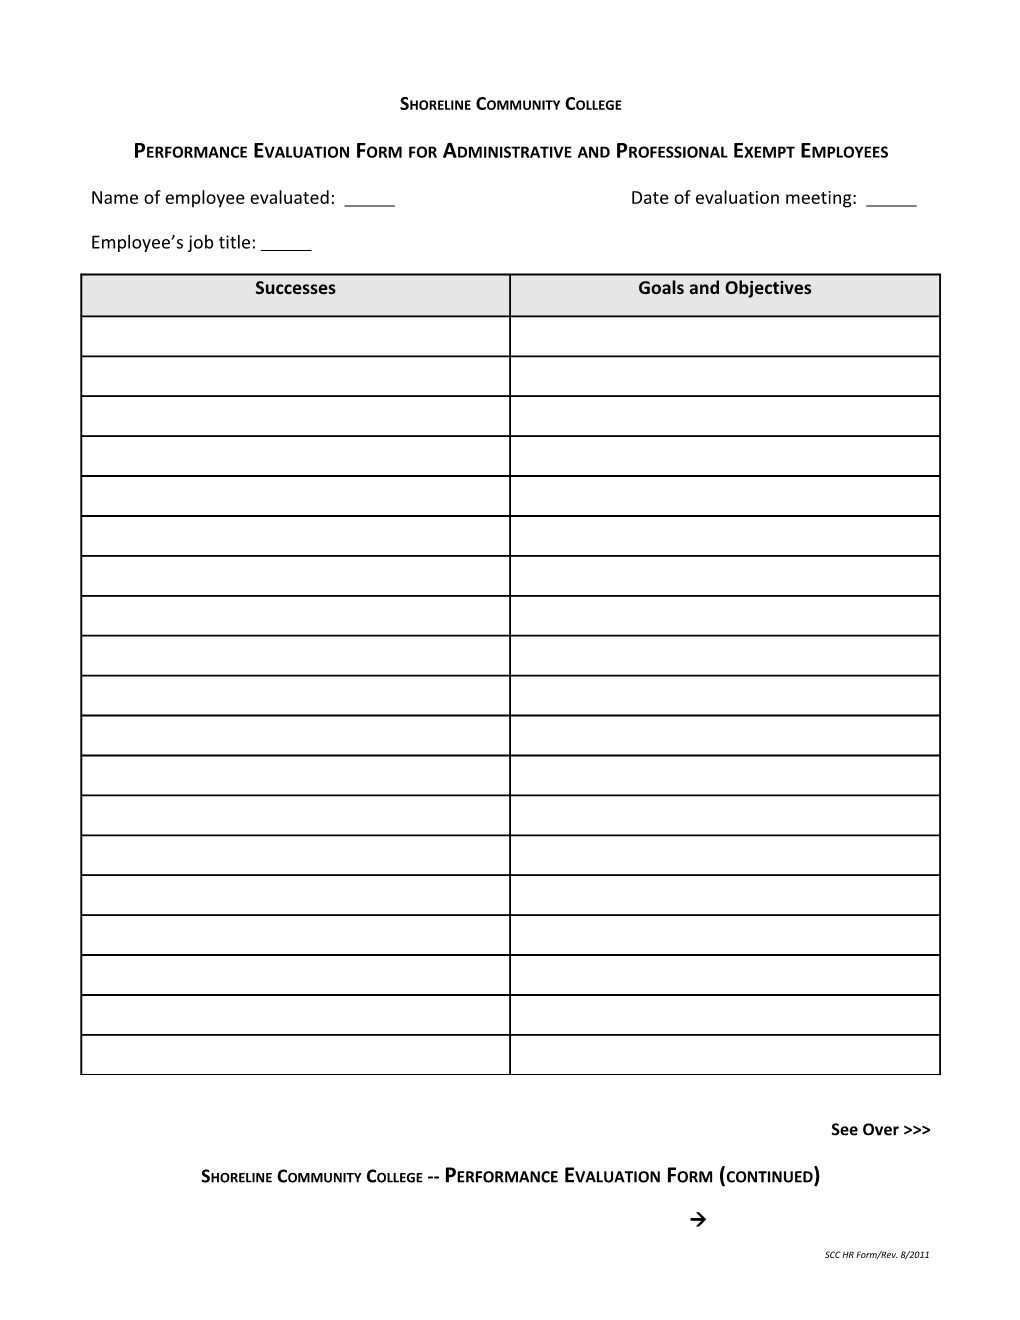 Performance Evaluation Form for Administrative and Professional Exempt Employees of Shoreline